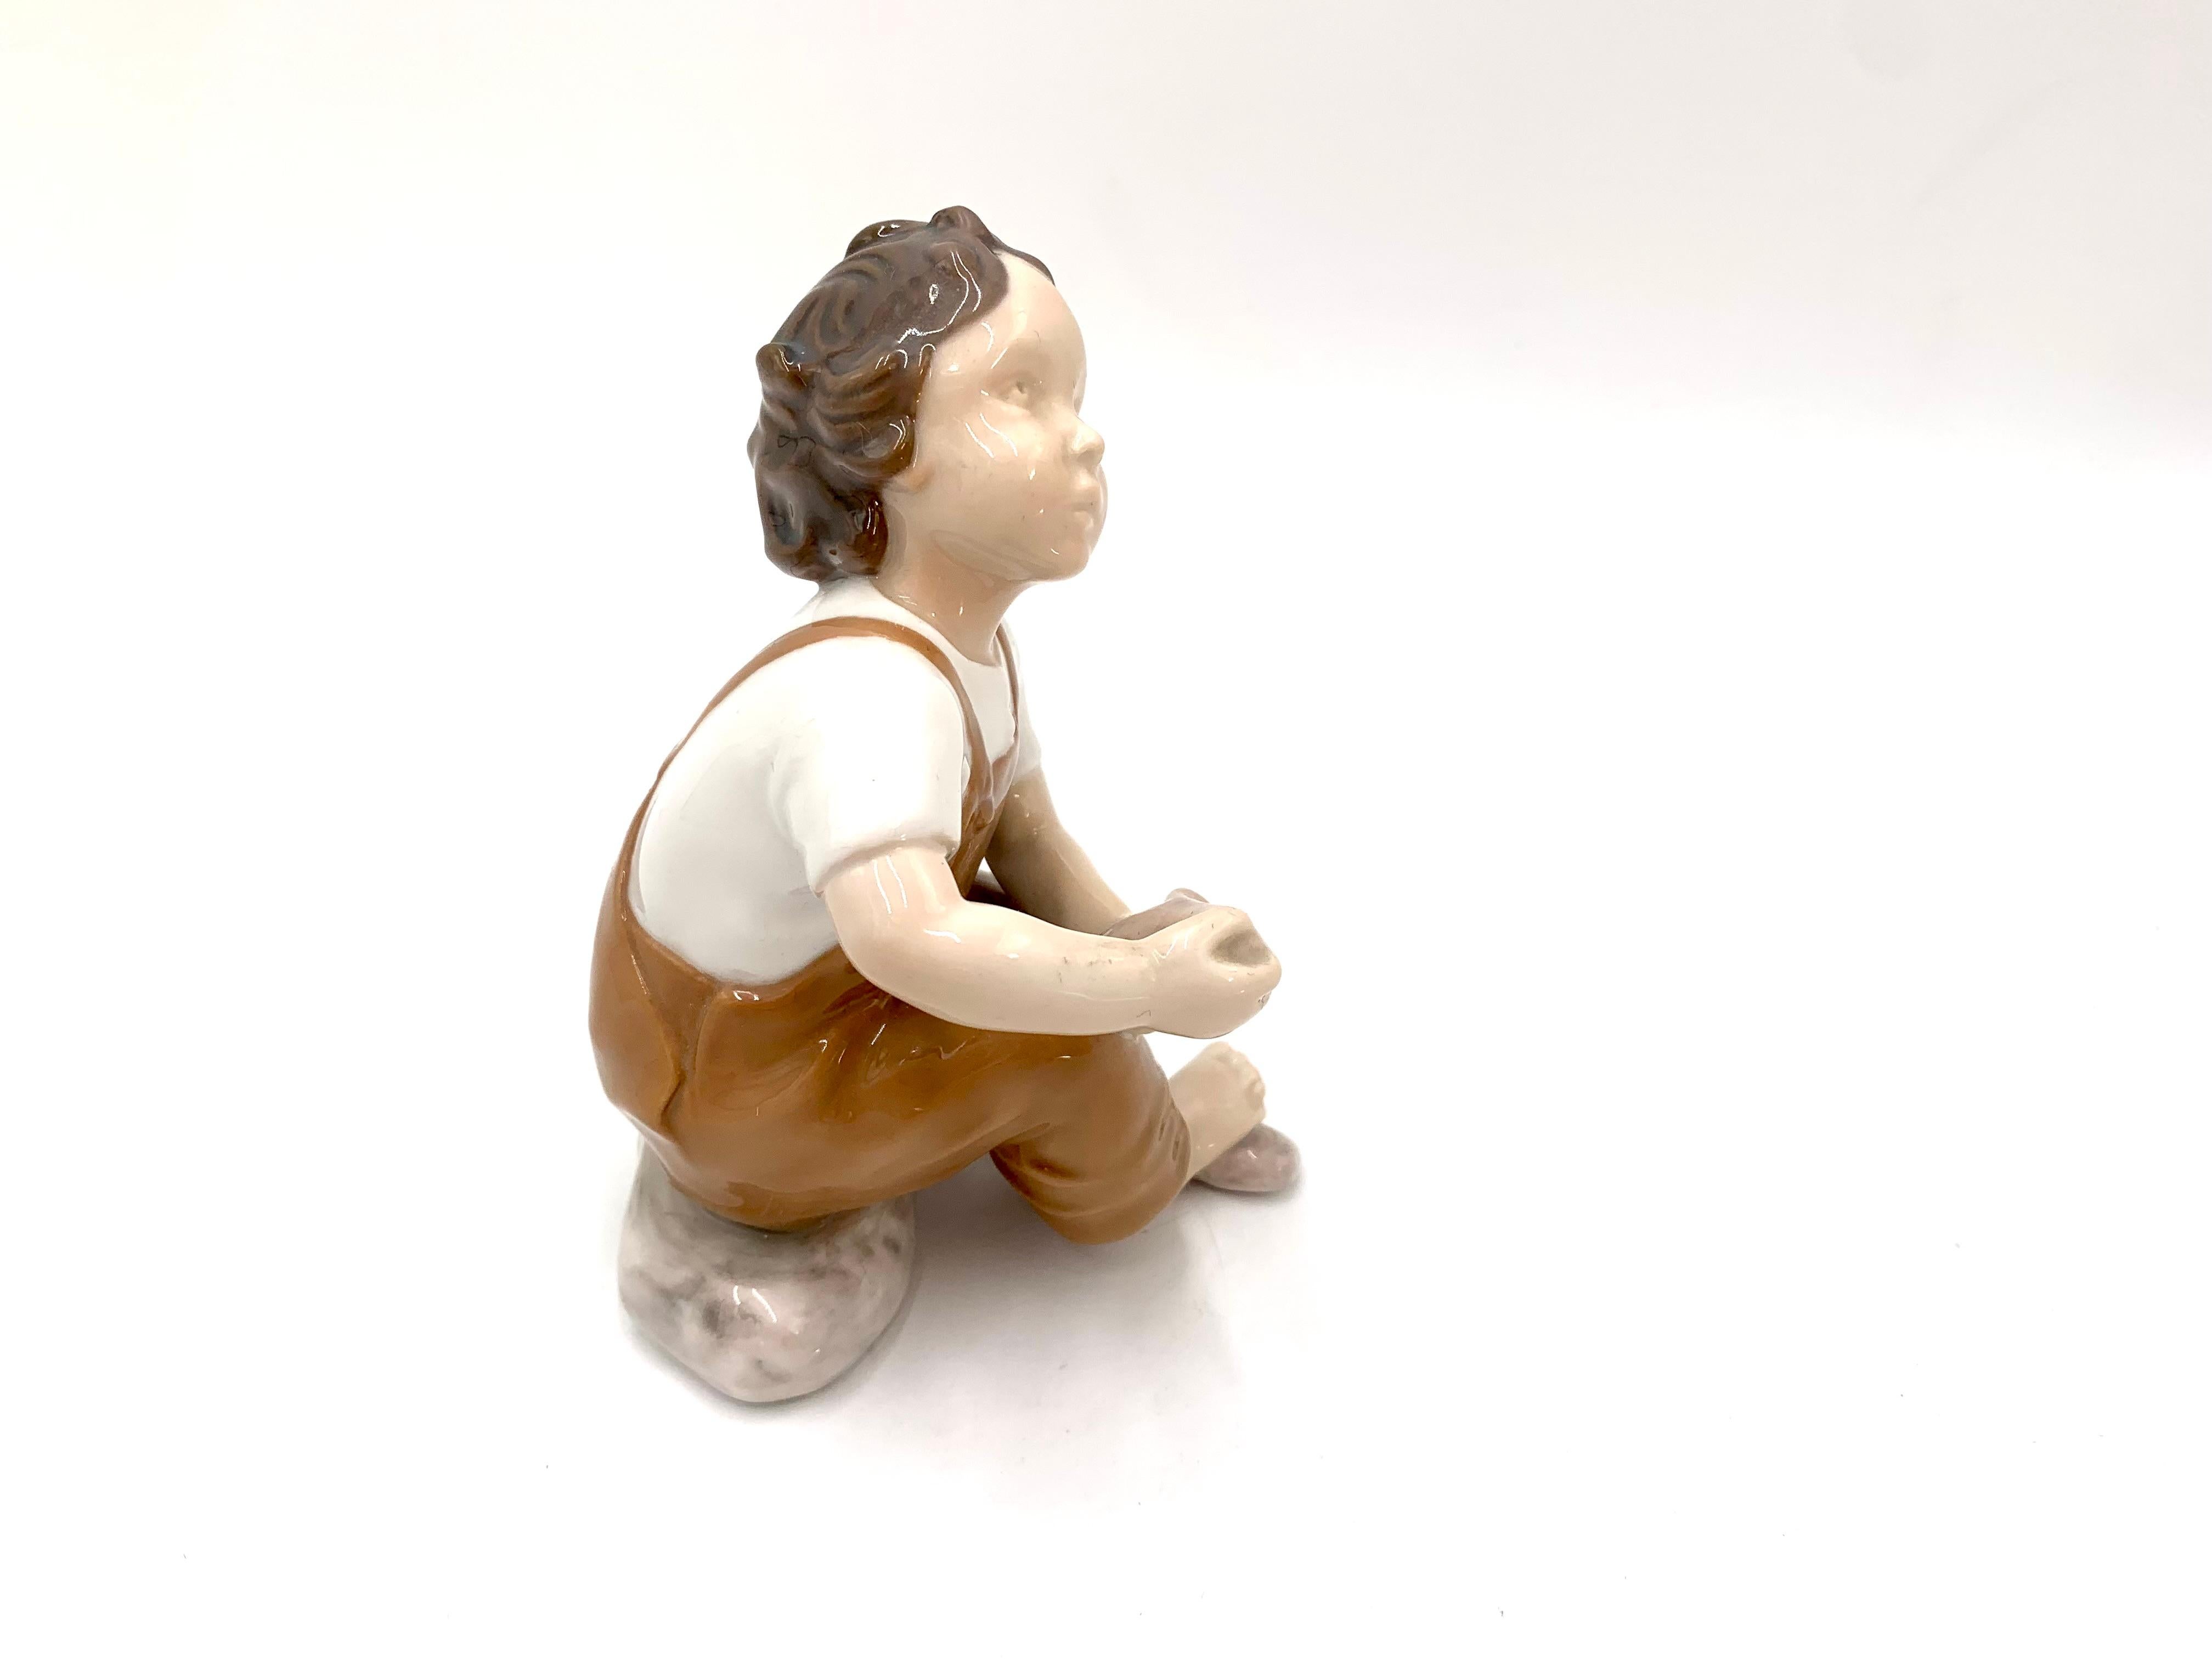 Porcelain Figurine of a Boy, Bing & Grondahl, Denmark, 1950s / 1960s In Good Condition For Sale In Chorzów, PL